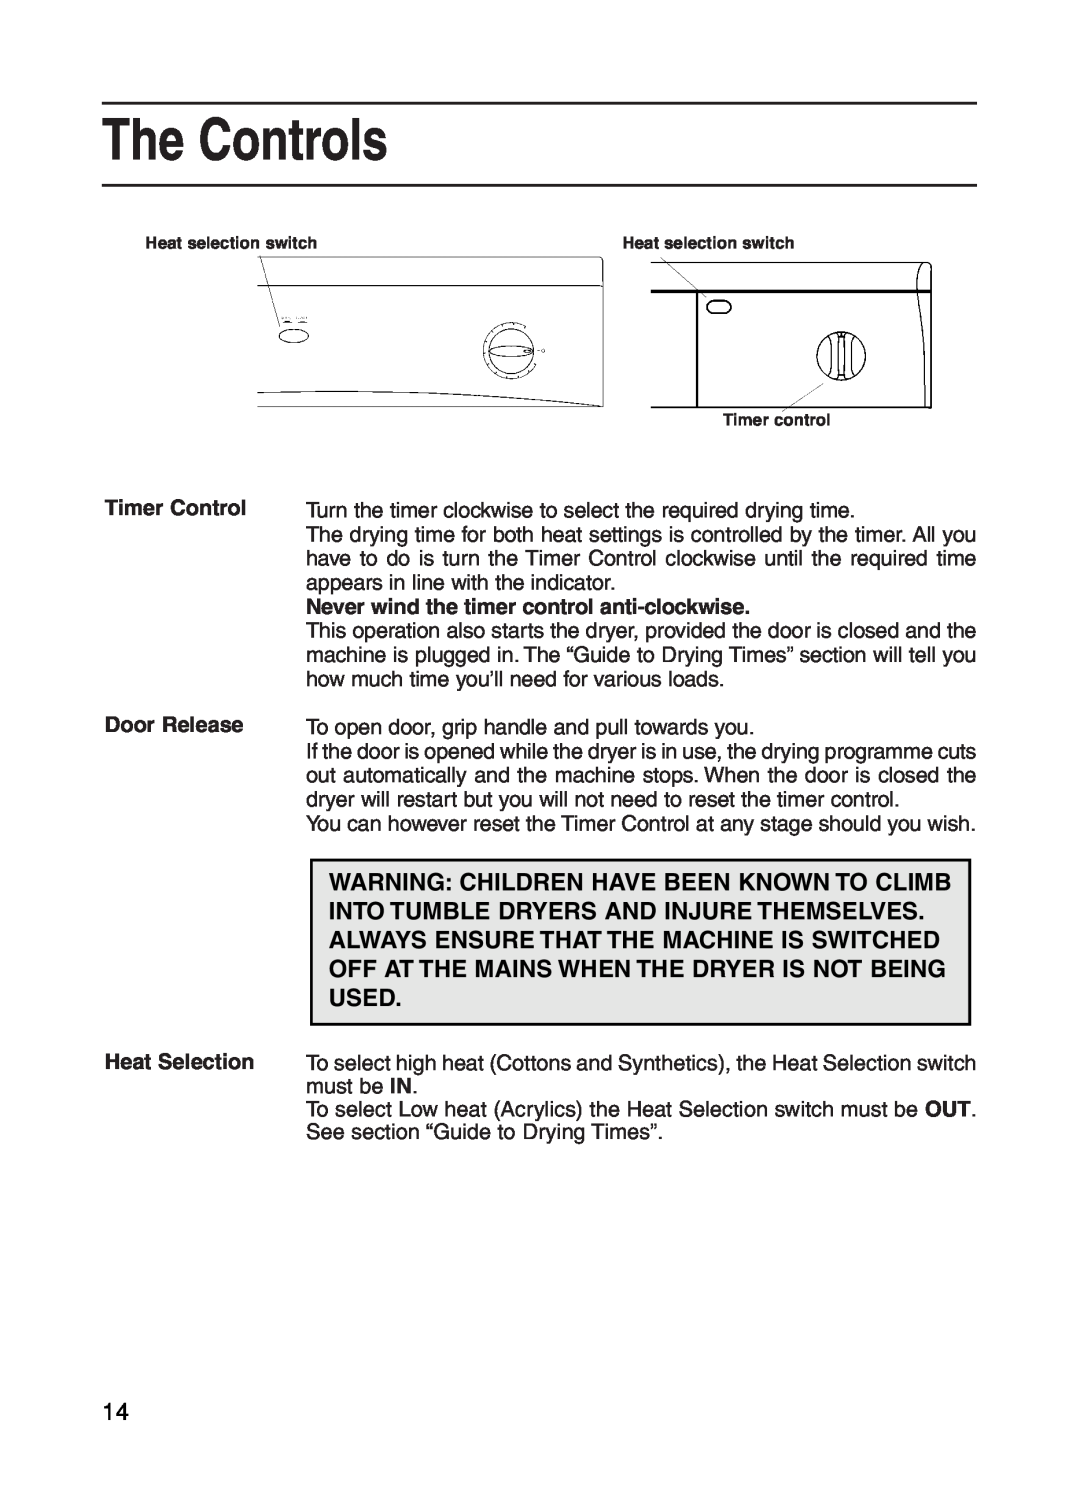 Indesit G73V manual The Controls, Warning Children Have Been Known To Climb, Into Tumble Dryers And Injure Themselves 